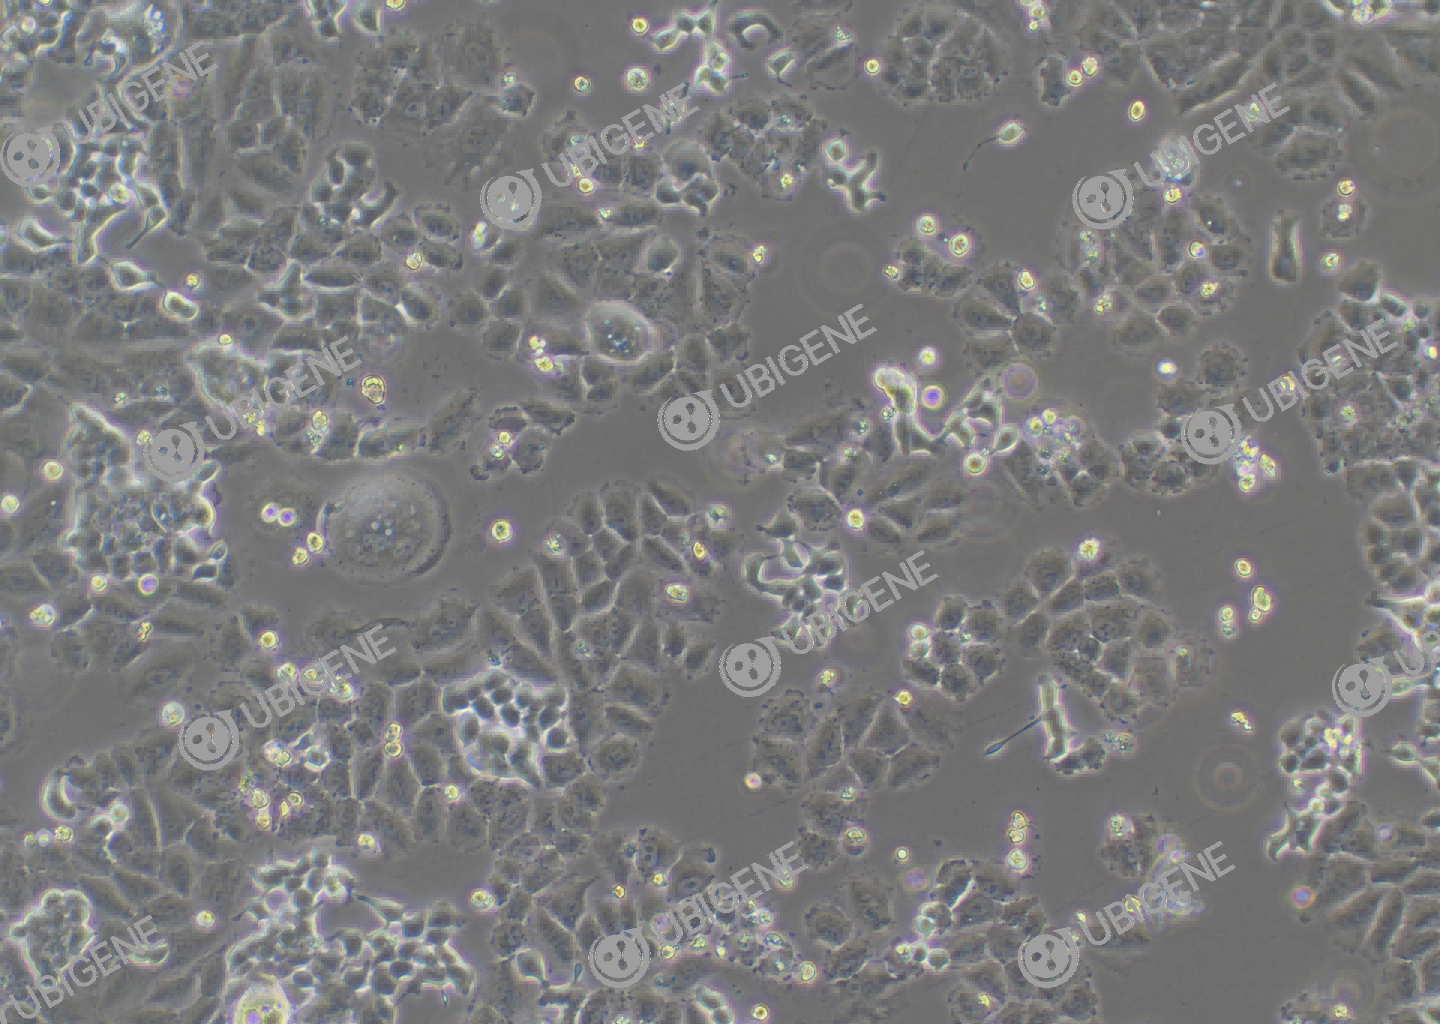 NCI-H727 cell line Cultured cell morphology